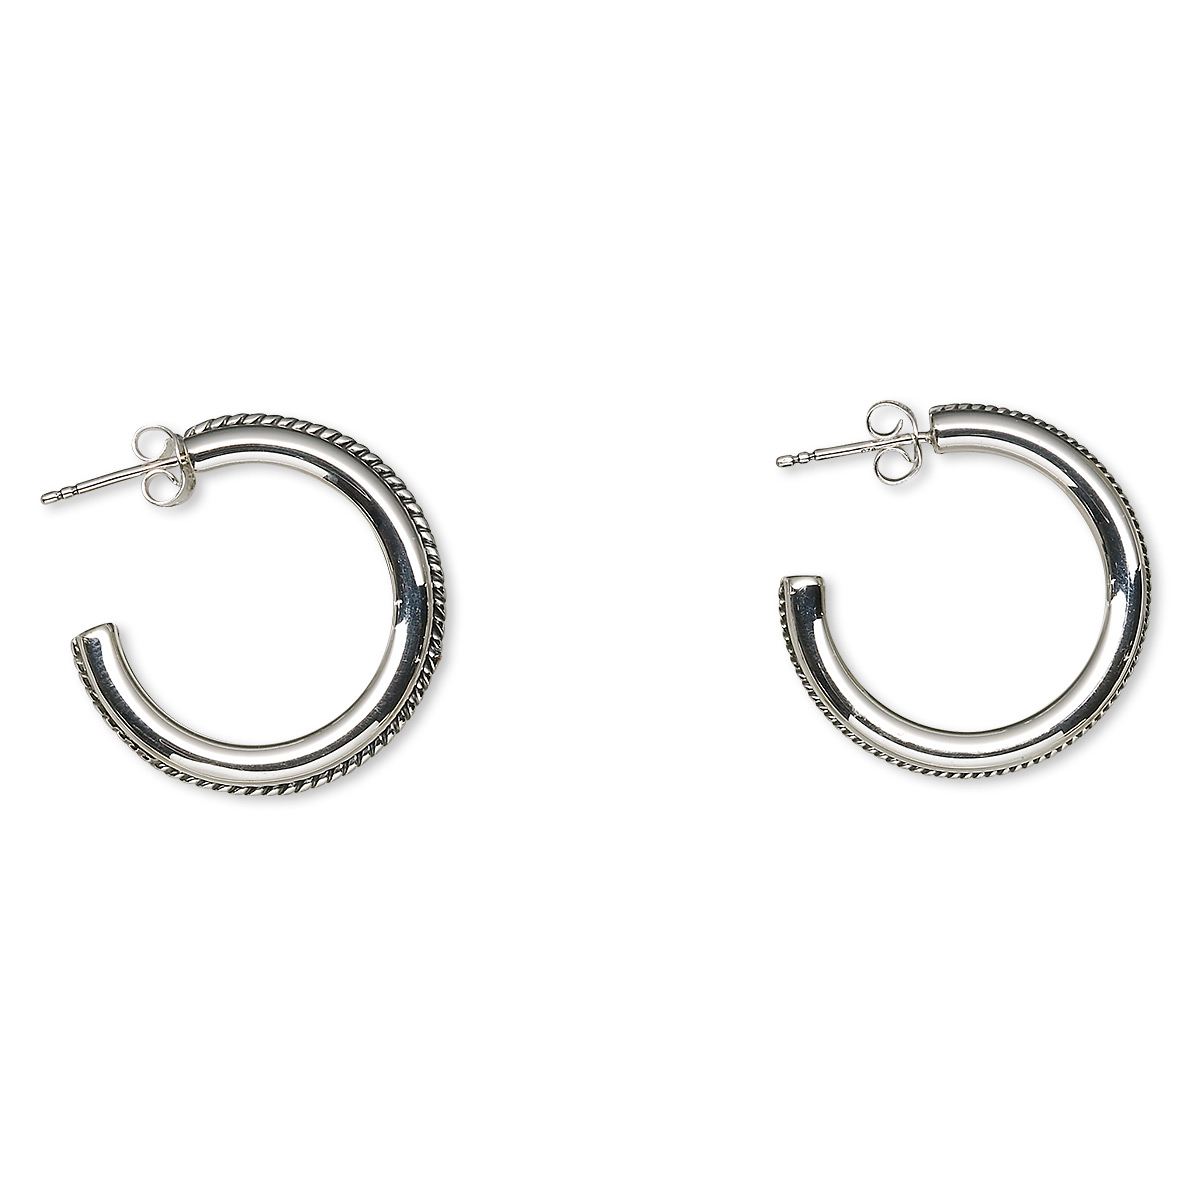 Earring, sterling silver, 26mm round hoop with twisted wire design and ...